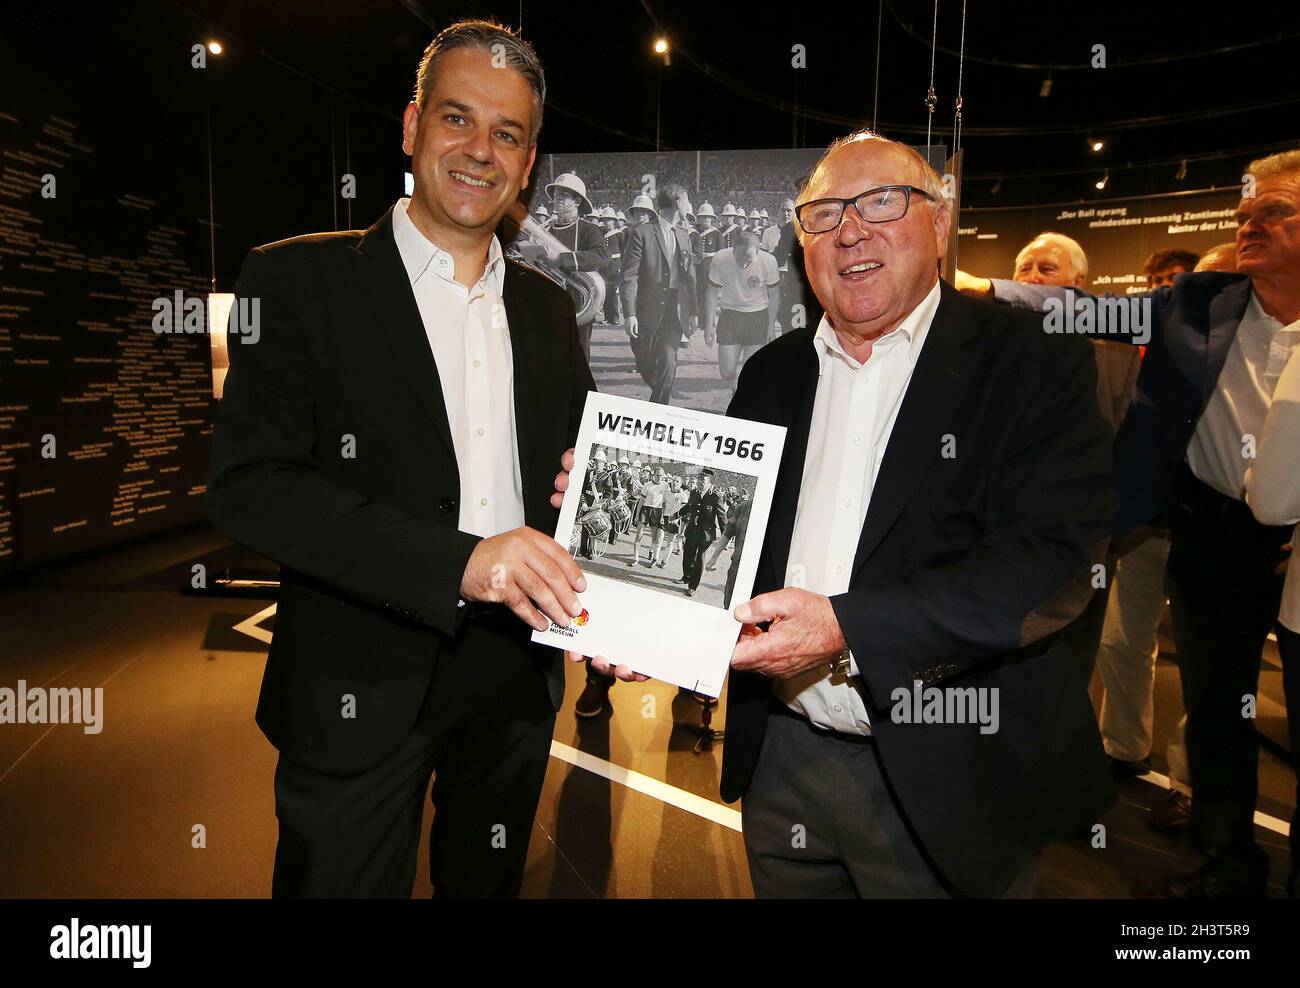 Uwe Seeler celebrates his 85th birthday on November 5th, 2021 firo: July 31st, 2016 Football, season German Football Museum DFM honors 50 years of World Cup 1966 Vice with a special exhibition Manuel Neukirchner, DFM with Uwe Seeler The final of the 8th Football World Cup in 1966 between .England and Germany (4: 2 nV) has become a myth. The German Football Museum honors the unforgettable encounter with the legendary 'Wembley goal' for the anniversary with the special exhibition '50 years of Wembley' The myth in Snapshots Â‚Ã „Ãº (July 31, 2016 Â‚Ã„ Ã¬ January 15, 2017). Artistic media installa Stock Photo